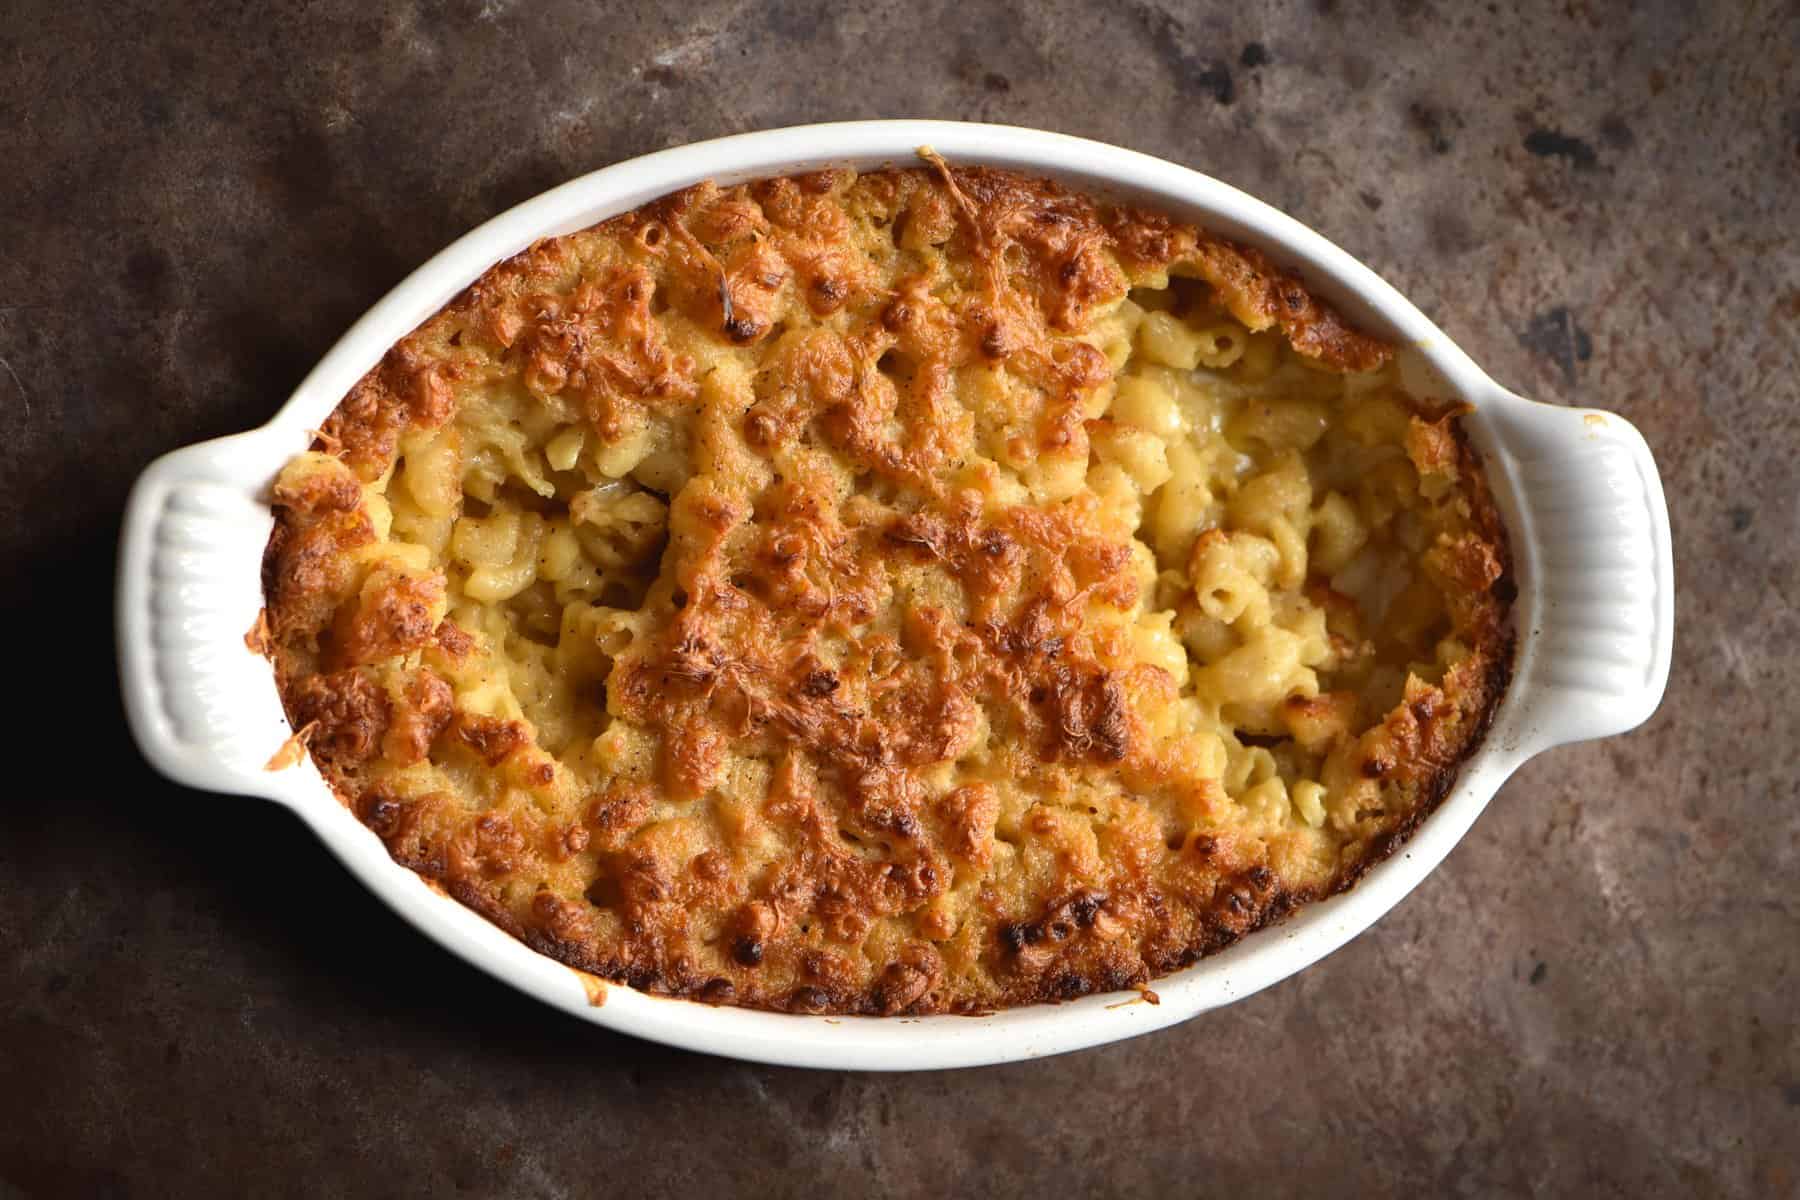 A close up of a vegan, gluten free and FODMAP friendly mac and cheese bake against a rusty backdrop